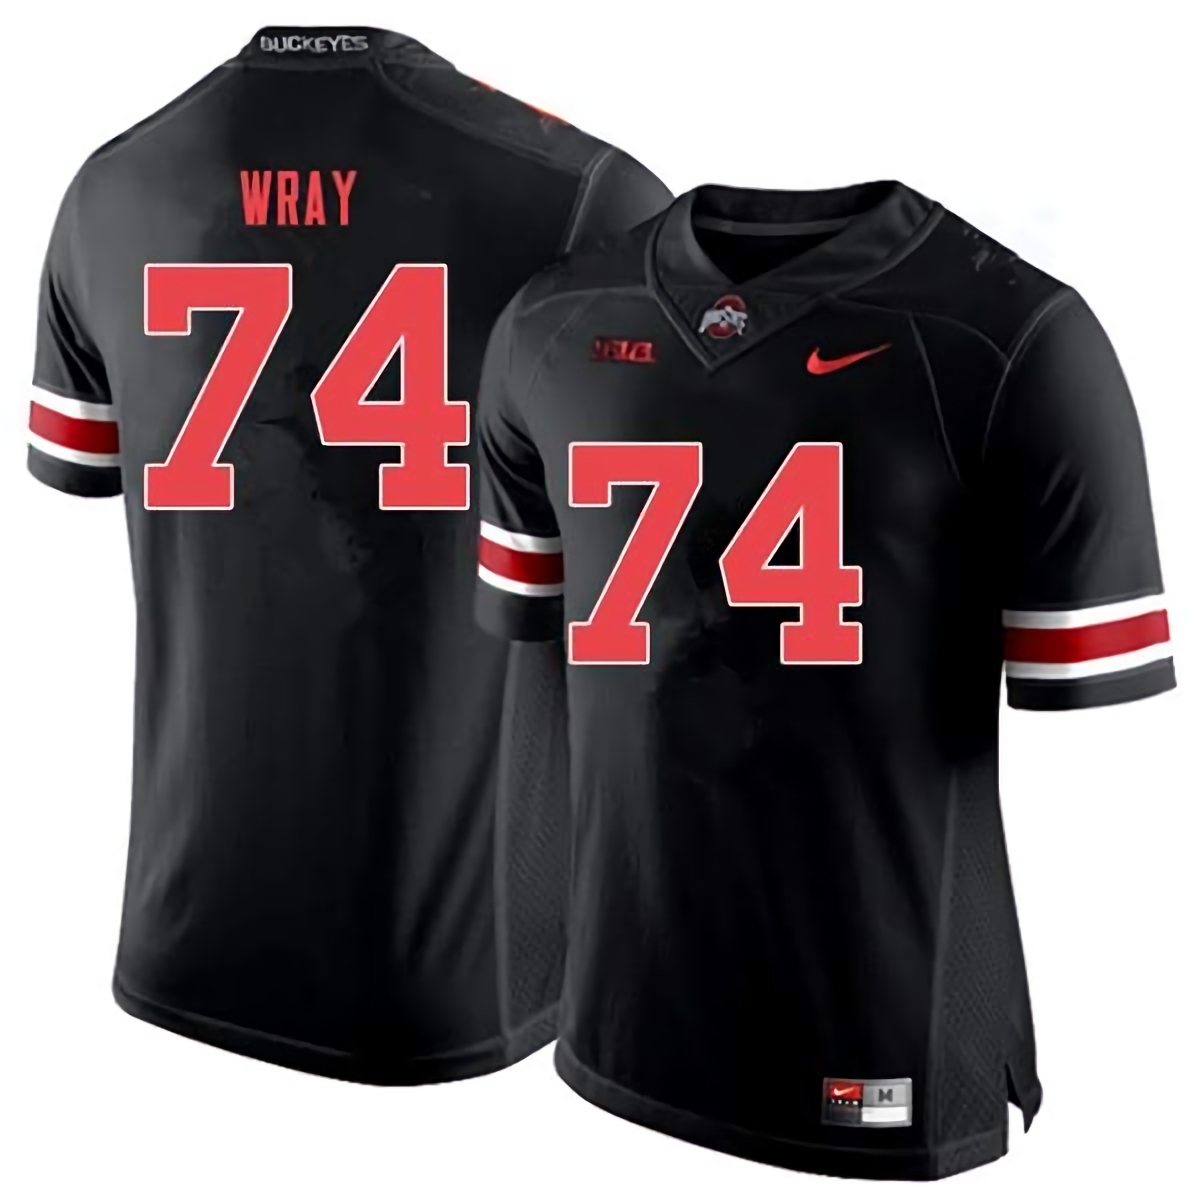 Max Wray Ohio State Buckeyes Men's NCAA #74 Nike Black Out College Stitched Football Jersey HNP7456OU